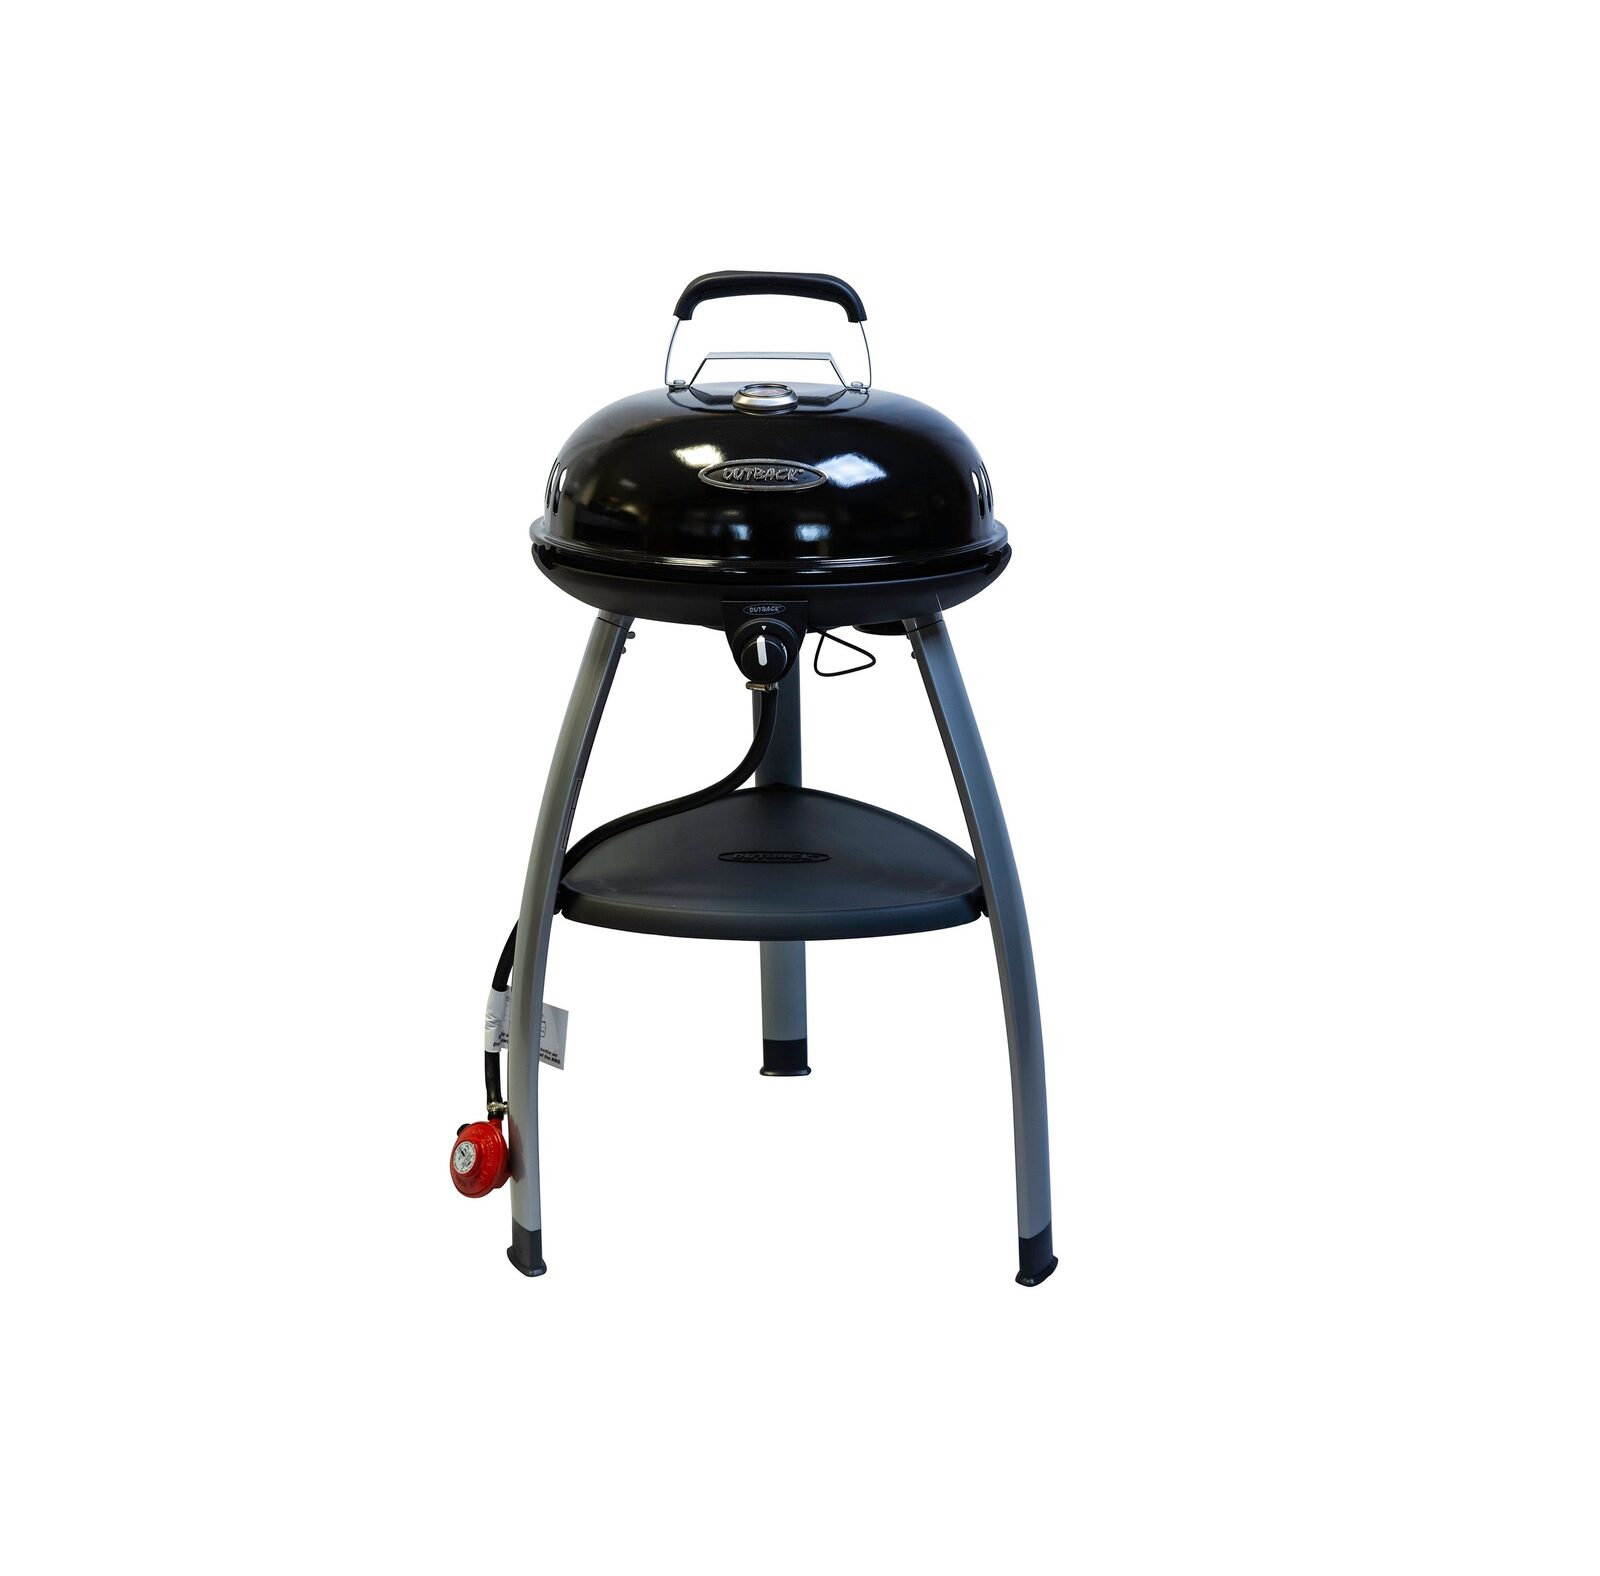 Cooking grid of the Outback Trekker Portable Gas BBQ - Black